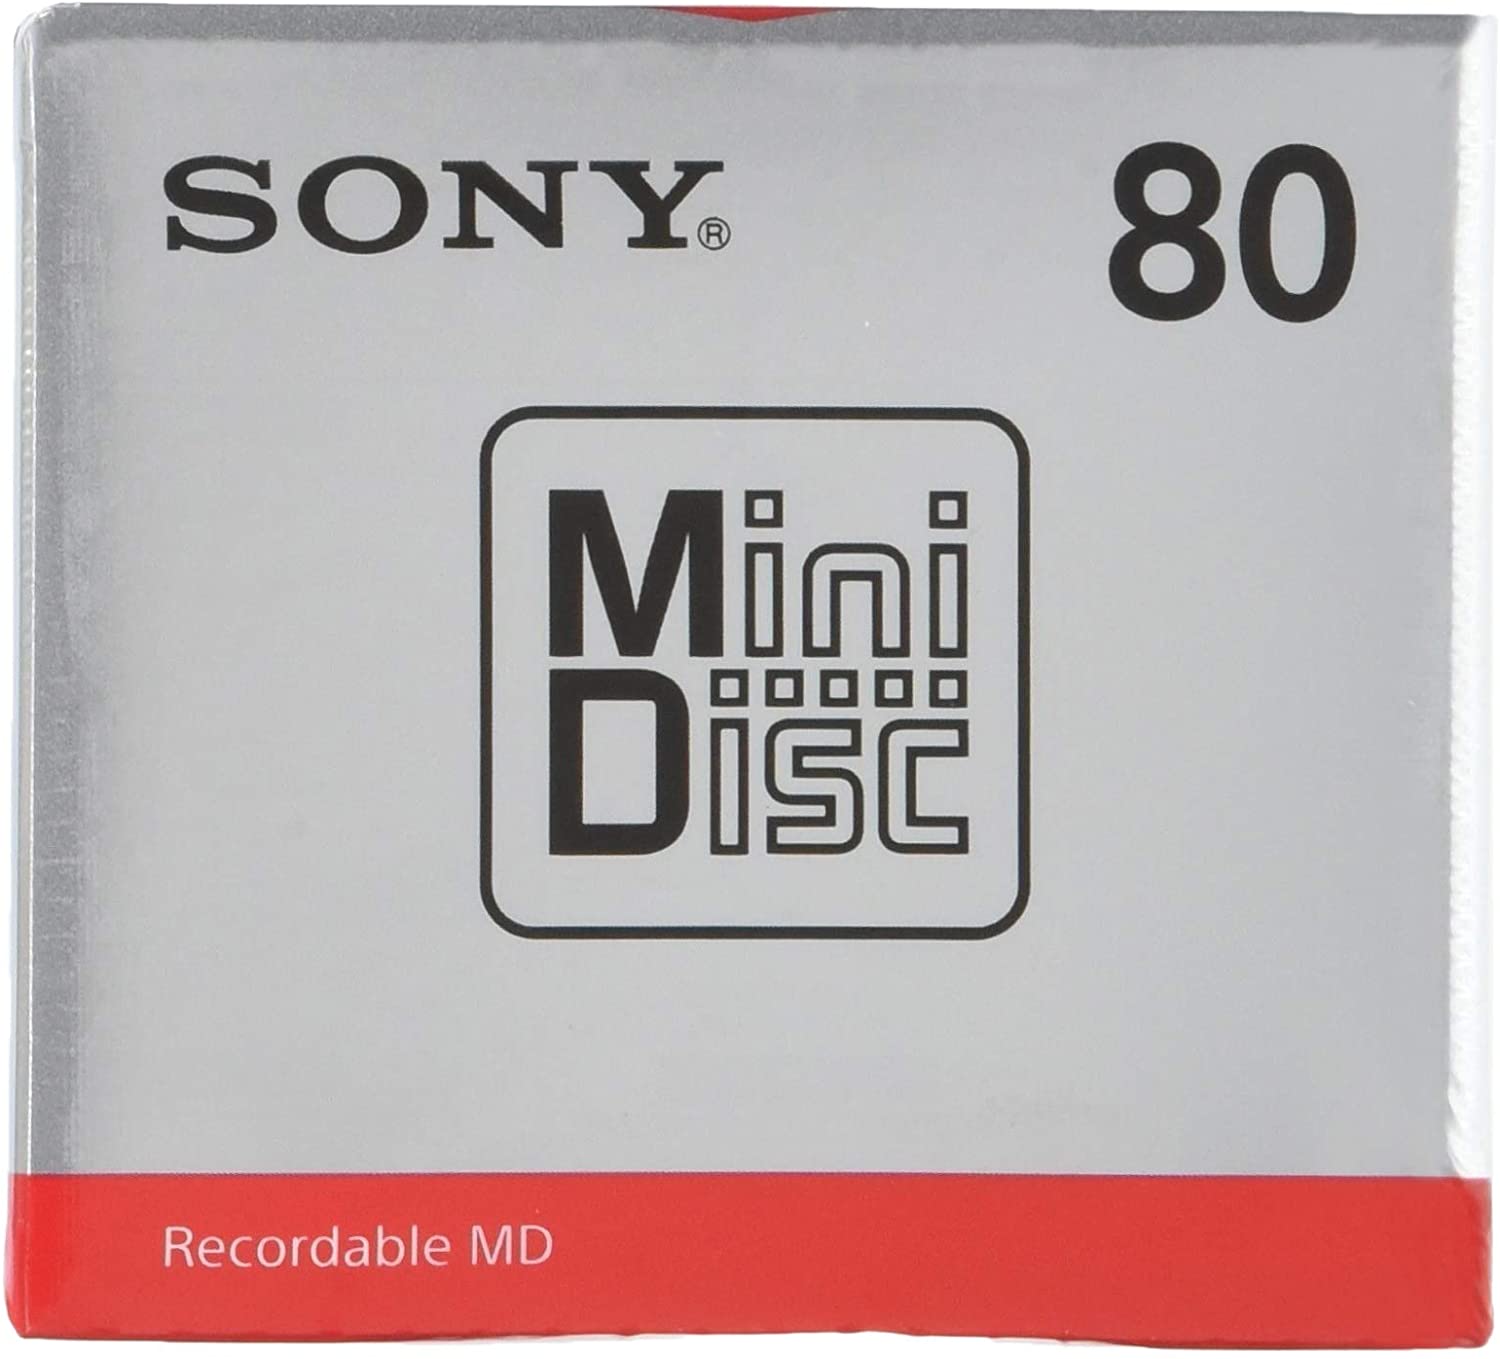 [10 piece ]SONY recording for Mini disk MD 80 minute MDW80T[10 piece ]